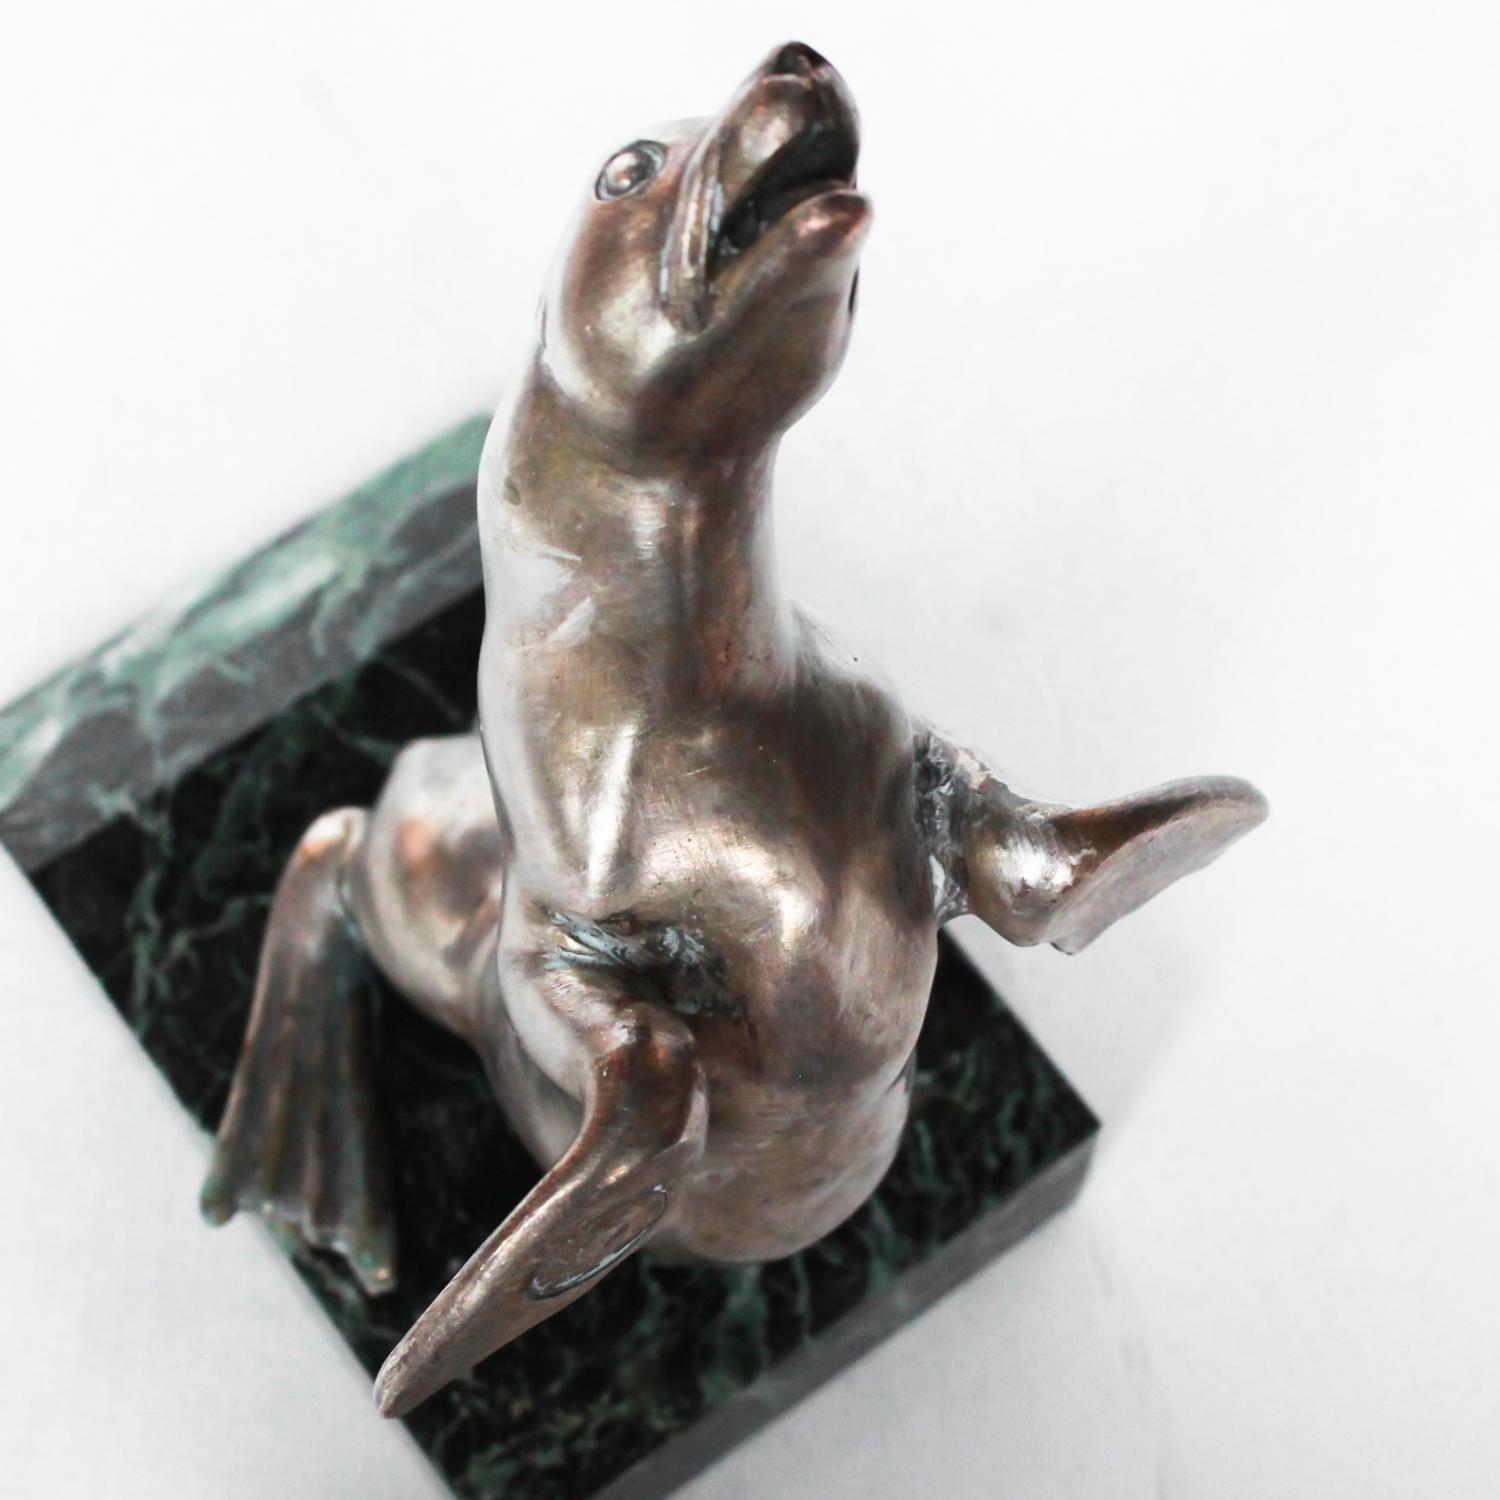 Art Deco, silvered spelter sealion bookends on an original marble plinth. Foundary seal too flipper.

Dimensions: H 21cm, W 13cm, D 9cm

Origin: French

Date: circa 1935

Item No: 2808194.